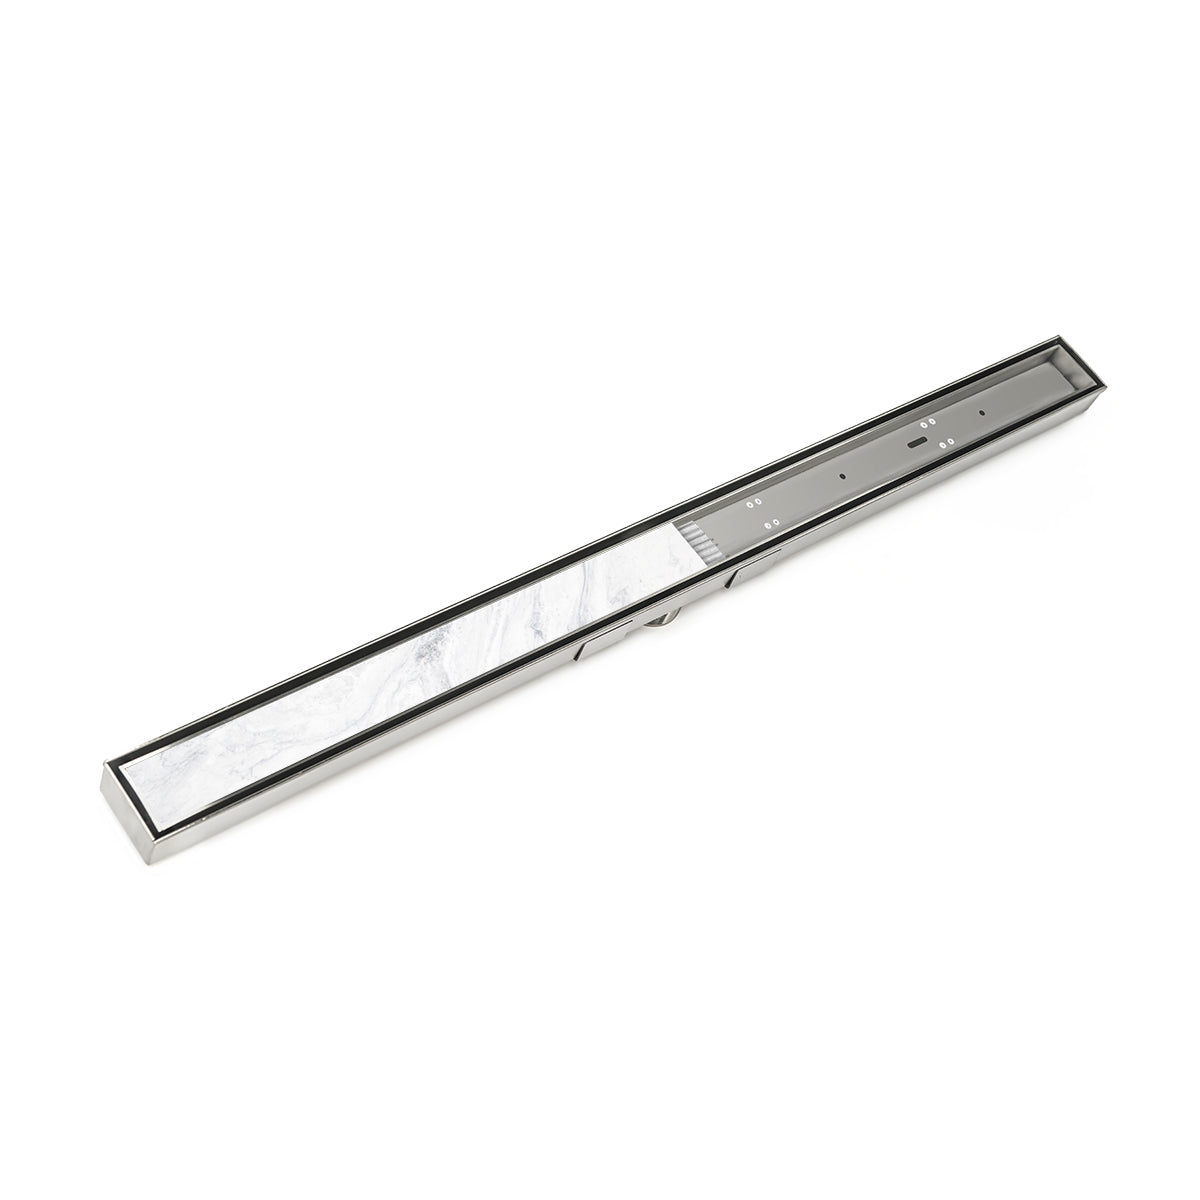 Infinity Drain 96" S-Stainless Steel Series High Flow Site Sizable Linear Drain Kit with Low Profile Tile Insert Frame with ABS Drain Body, 3" Outlet